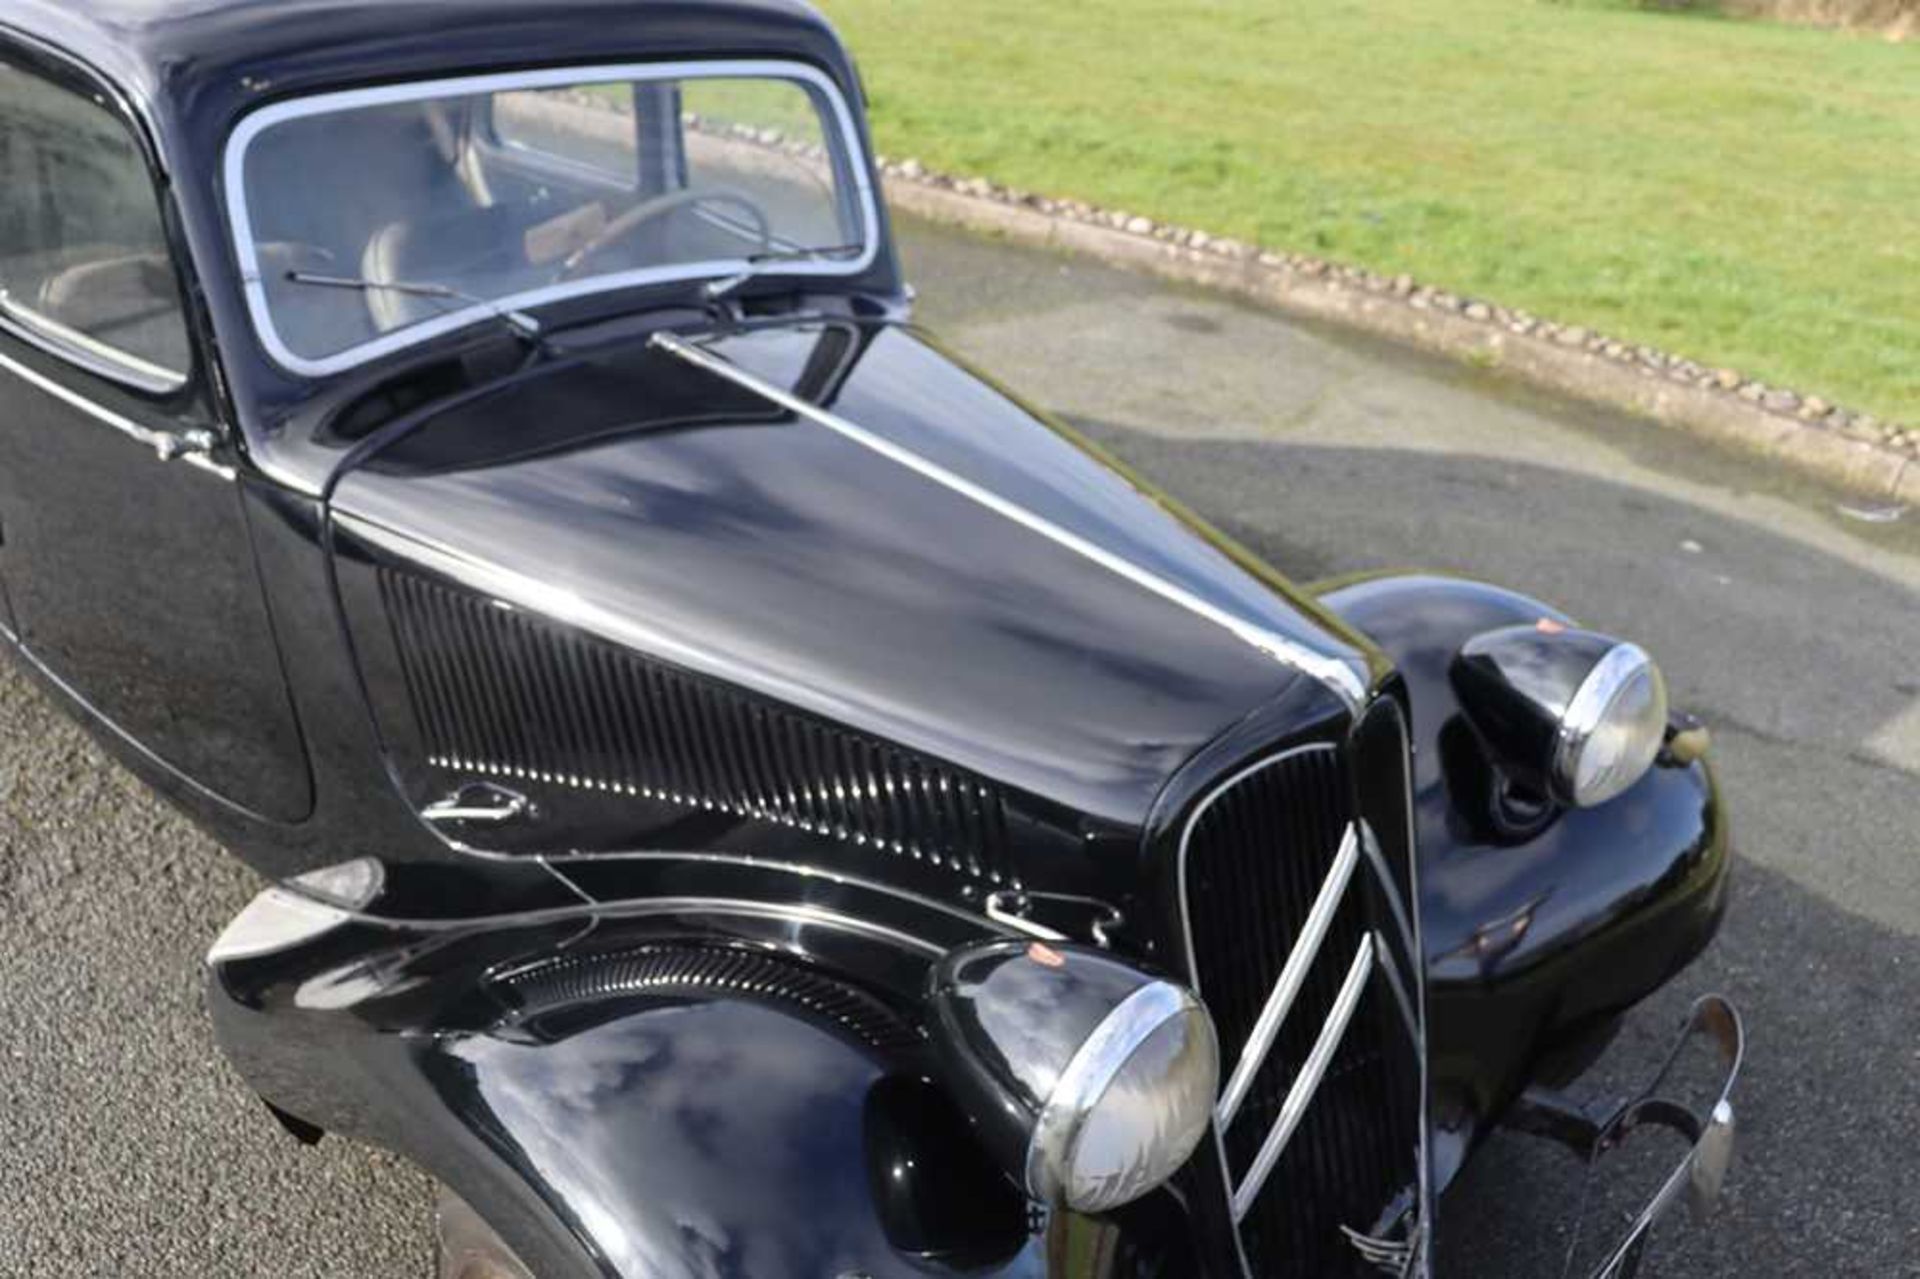 1952 Citroën 11BL Traction Avant In current ownership for over 40 years - Image 22 of 60